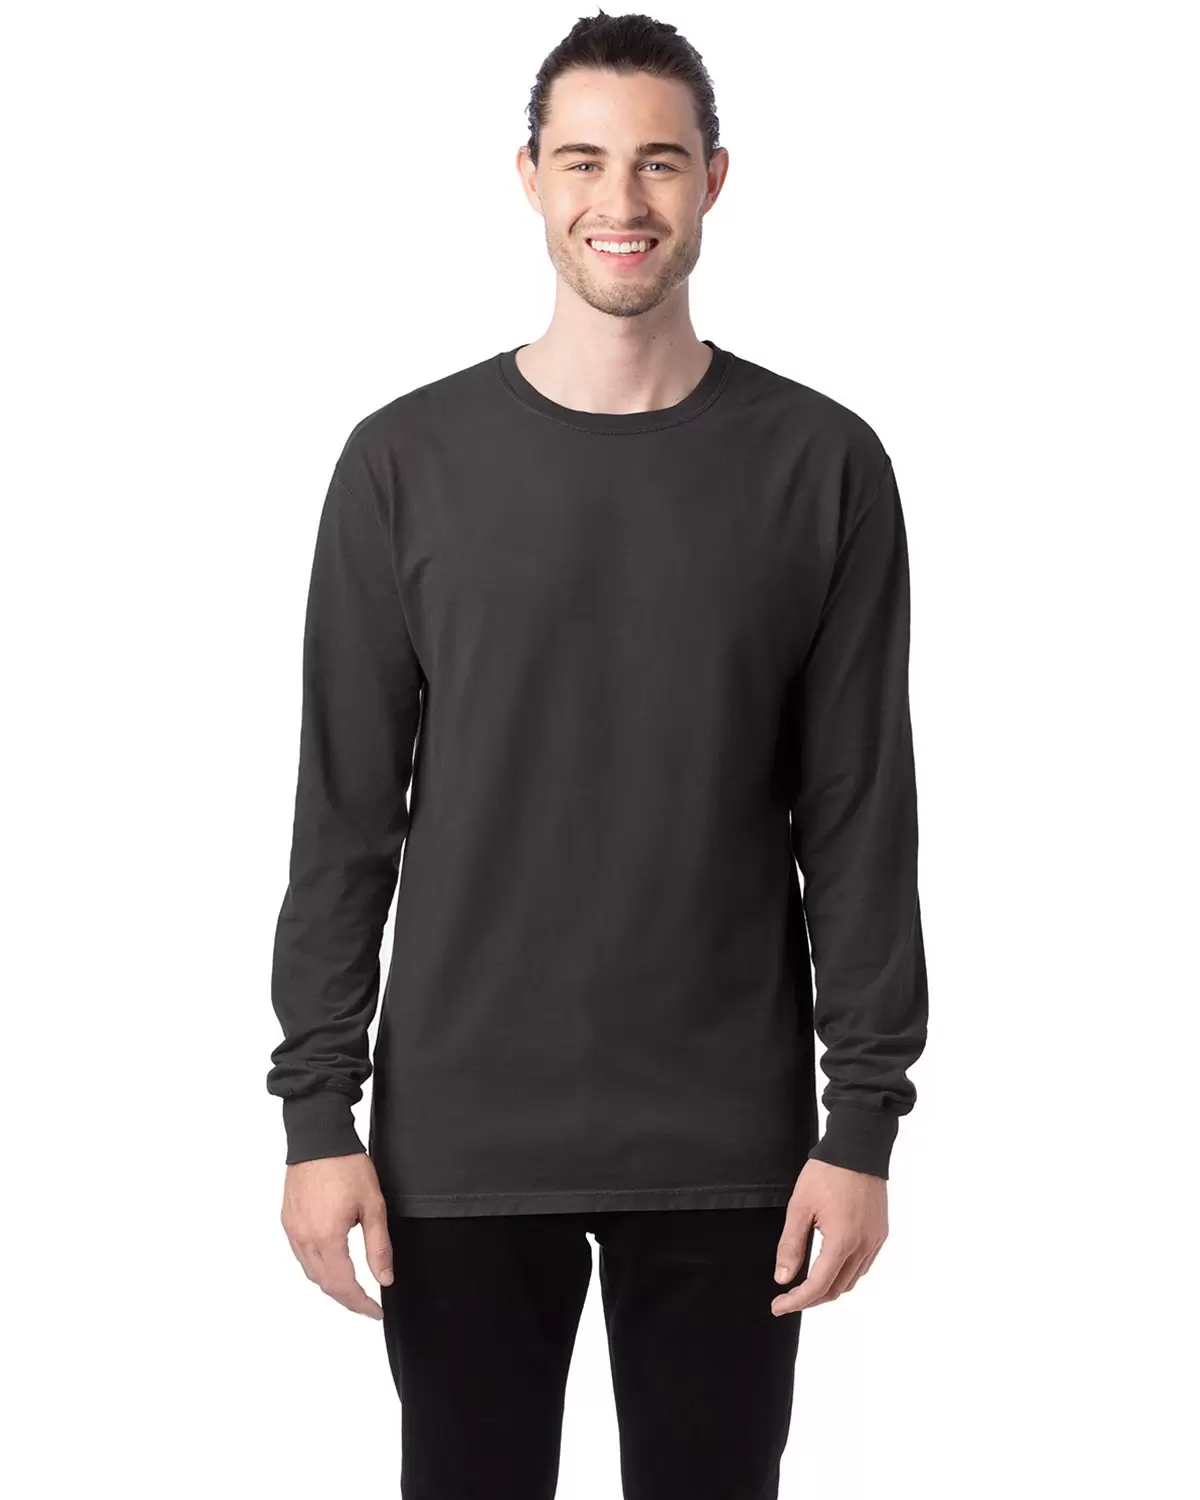 Comfort Wash GDH200 Garment Dyed Long Sleeve T-Shirt - From $12.24